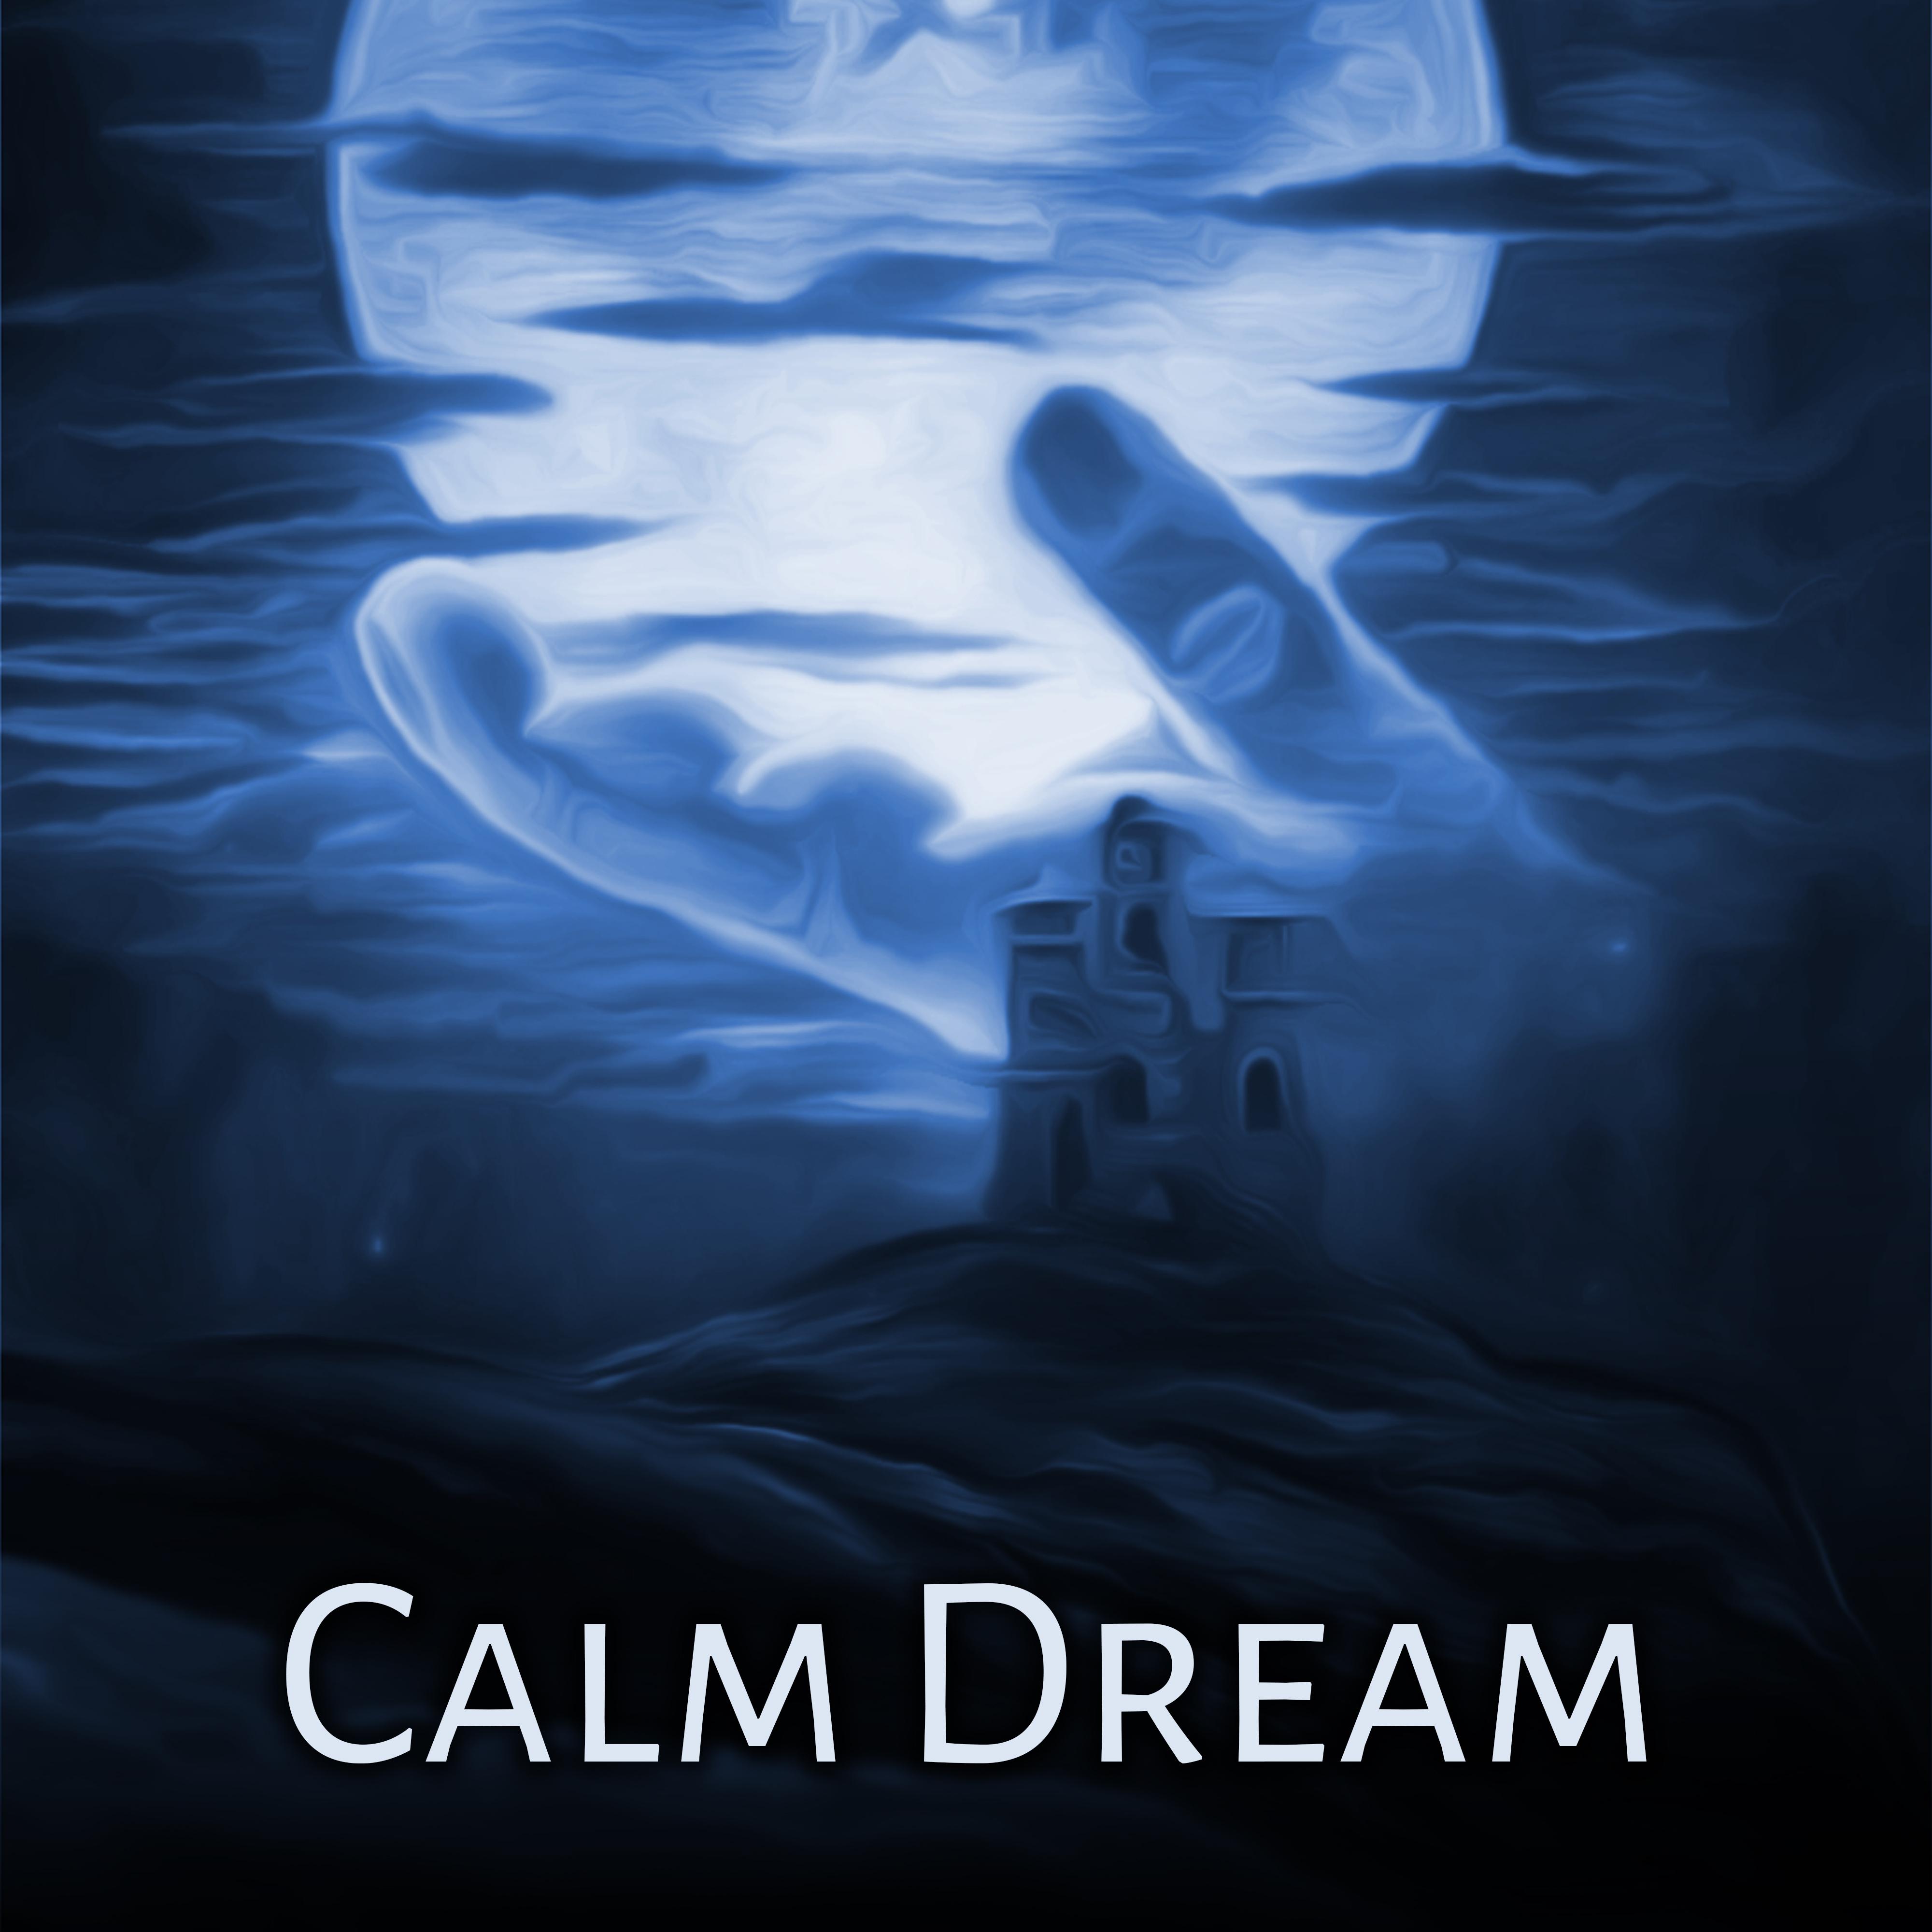 Calm Dream – Relaxing Therapy for Sleep, Soothing Sounds to Bed, Calm Down, Peaceful Mind, Soft New Age Music for Relaxation